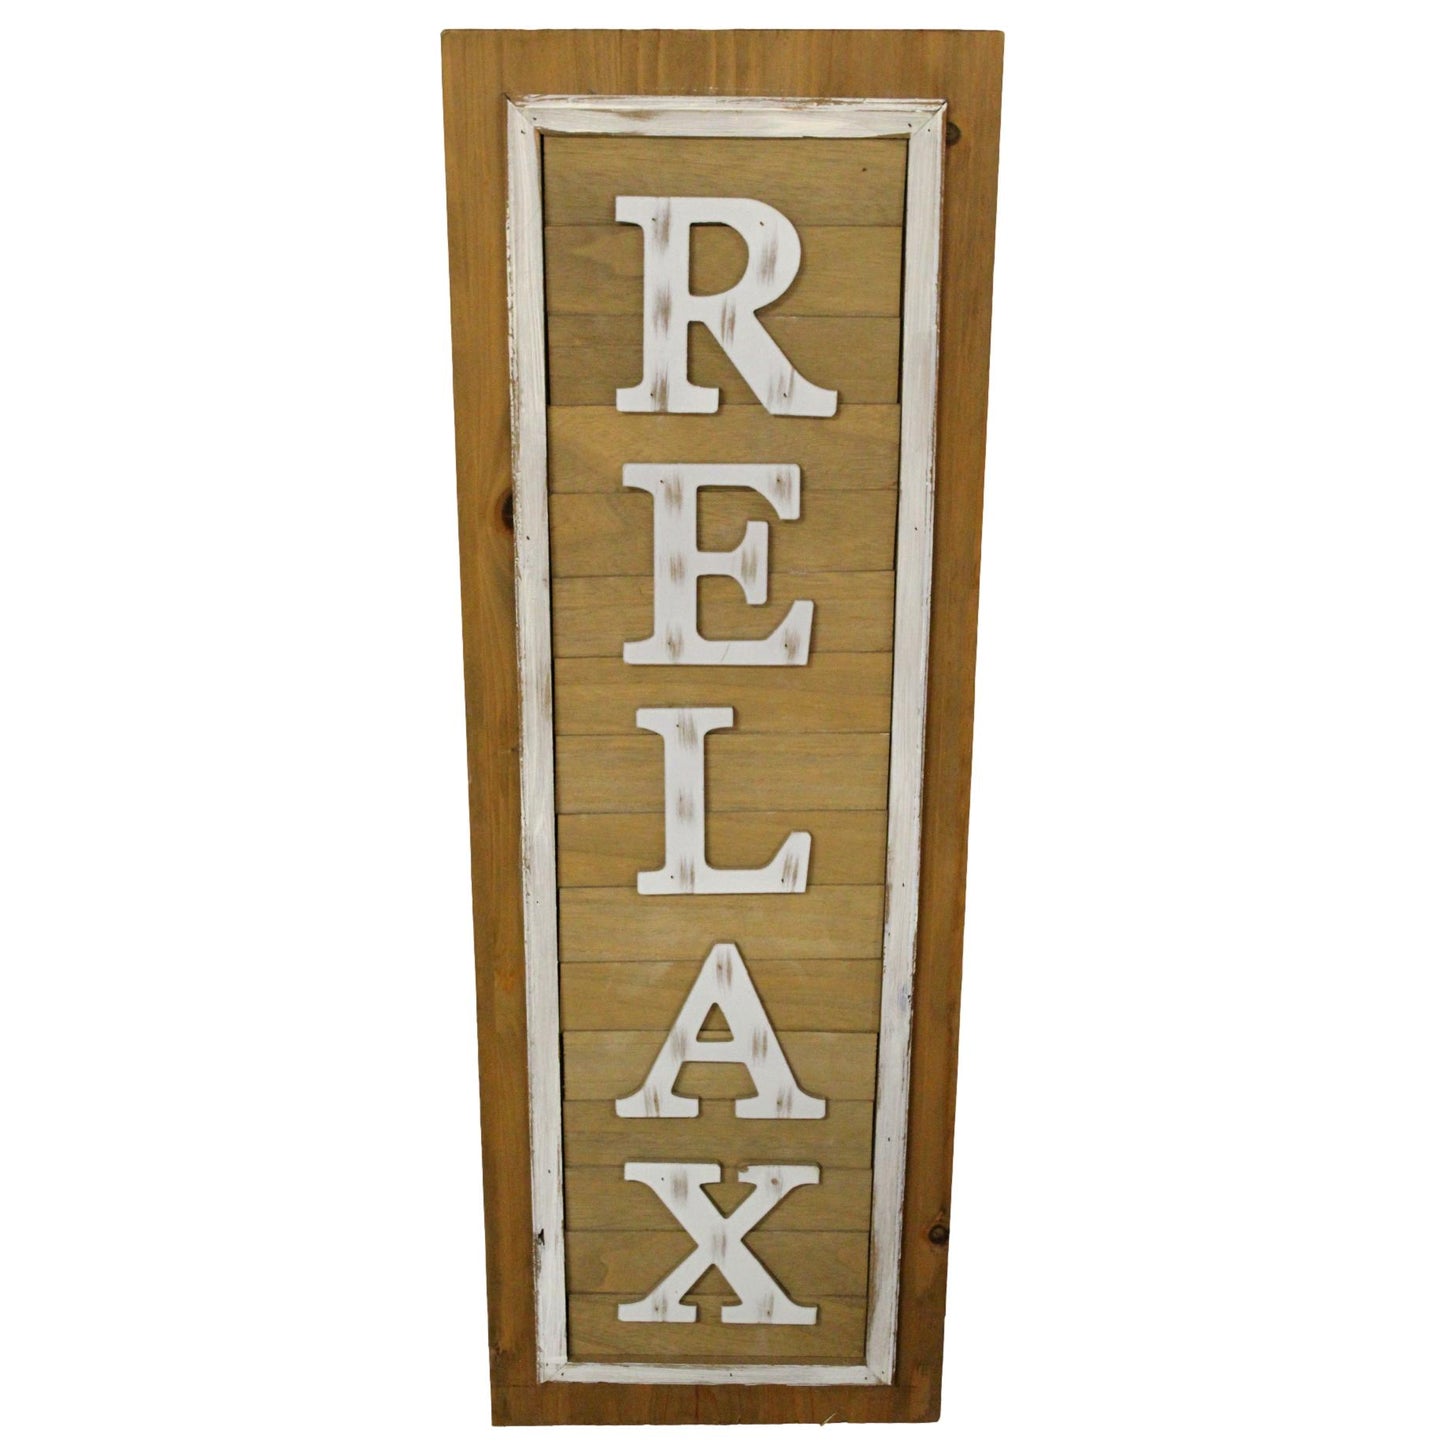 'Relax' Board Wall Hanging